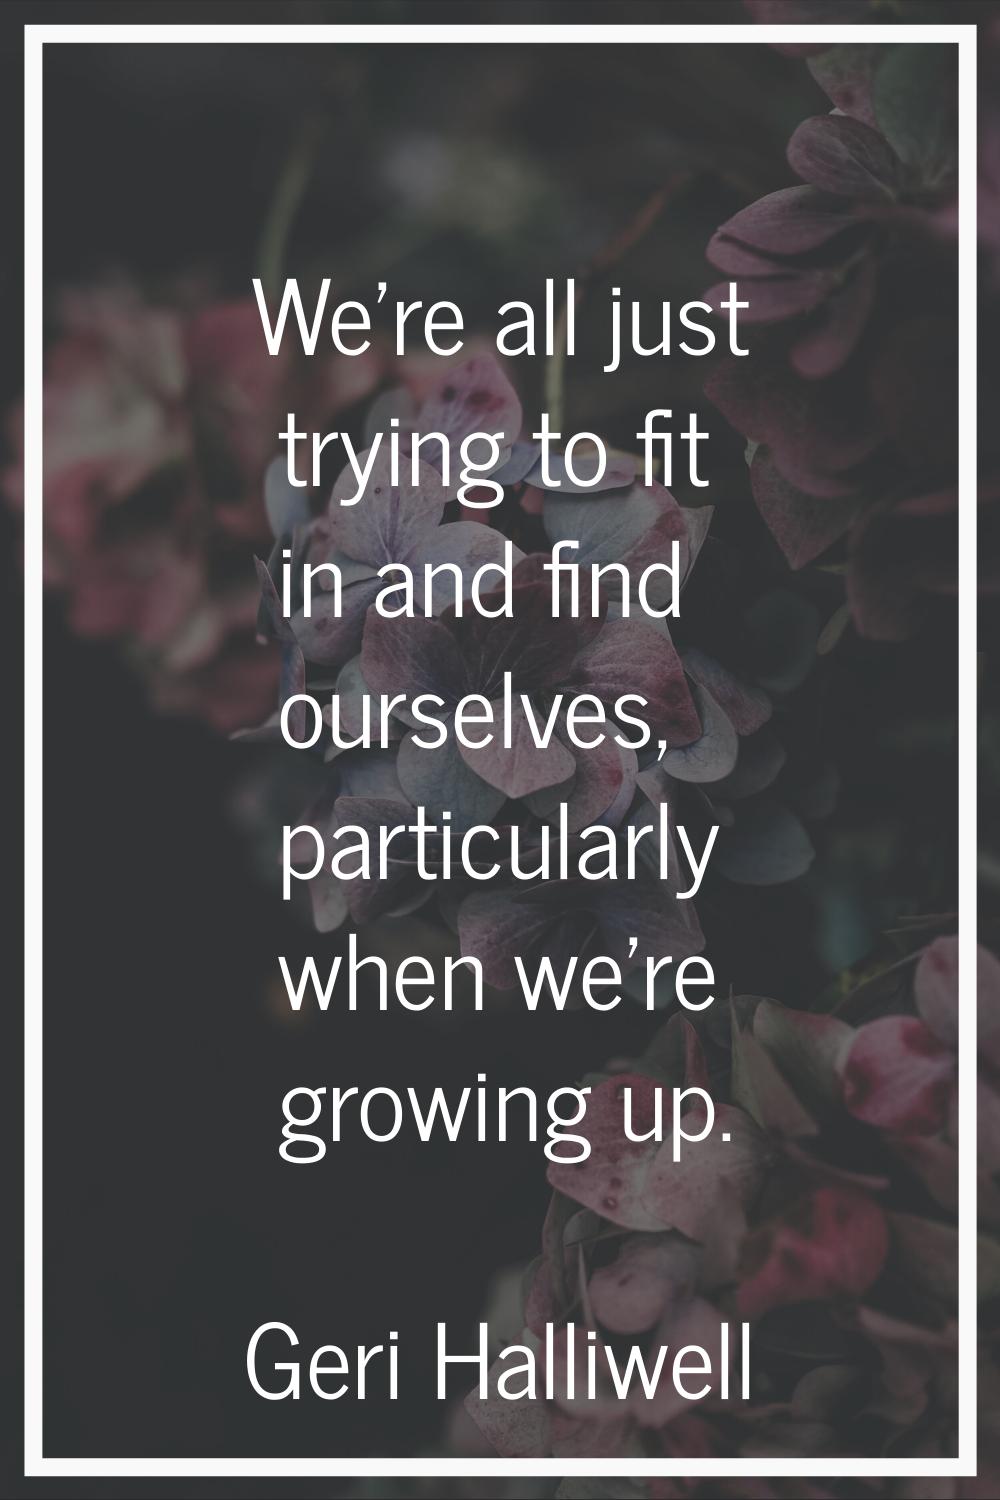 We're all just trying to fit in and find ourselves, particularly when we're growing up.